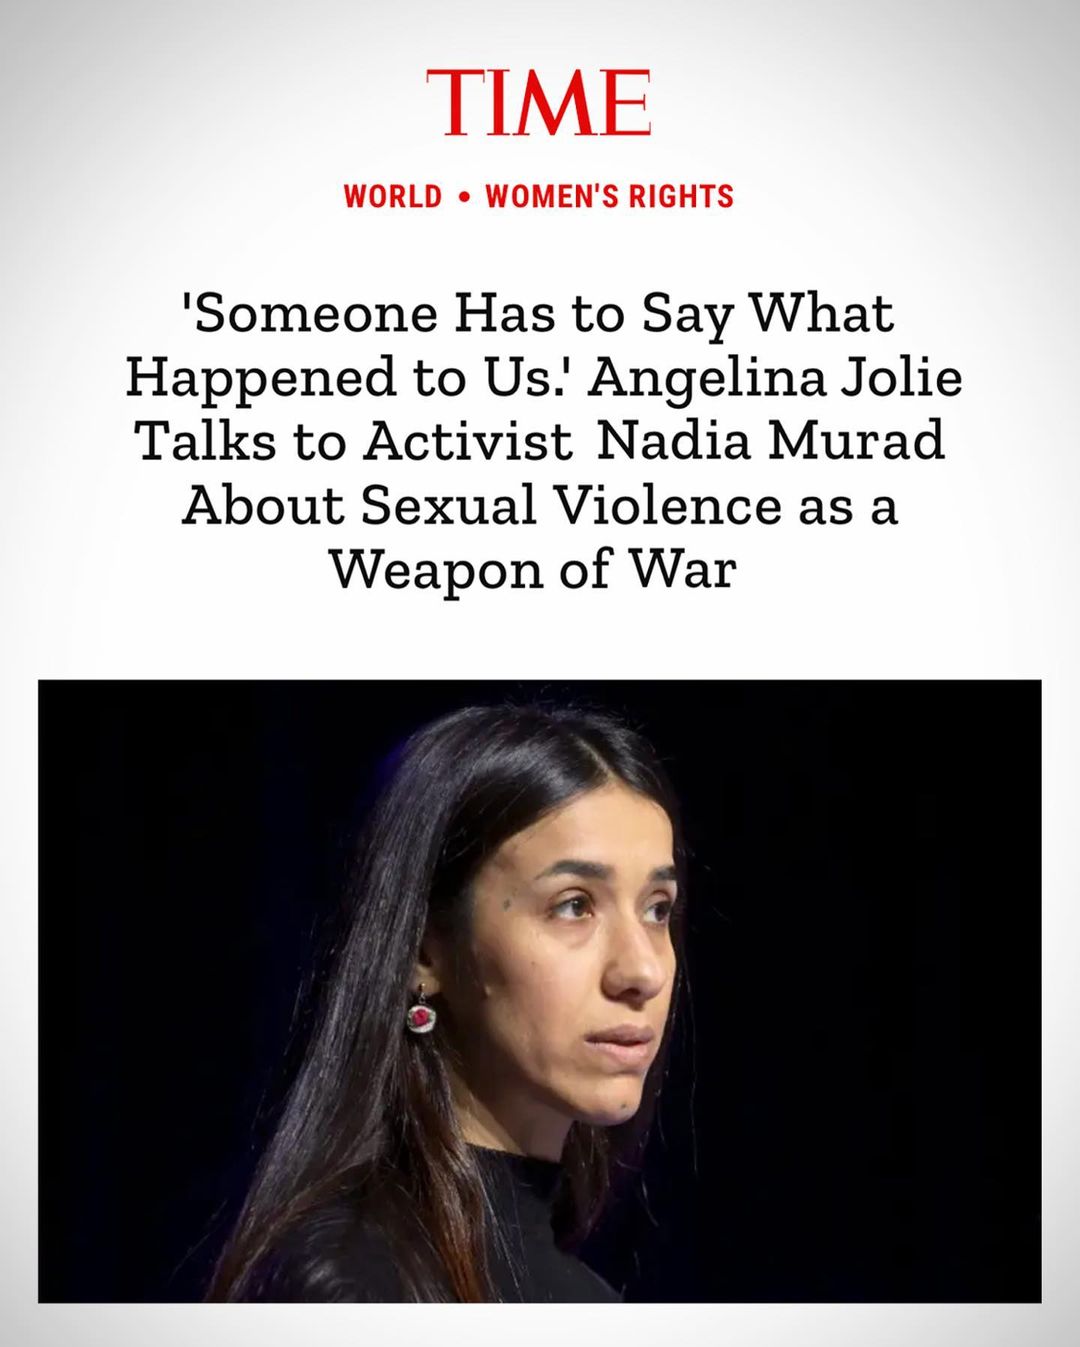 I was honored to speak with Nadia Murad, Nobel Laureate, advocate for gender equality and survivors of sexual violence, and founder of Nadia's Initiative and Murad Code, who has been a powerful voice on conflict-based sexual violence. This conversation deeply inspired me and I am grateful to share her words with all of you. Please follow her work @nadia_murad and @nadiasinitiative